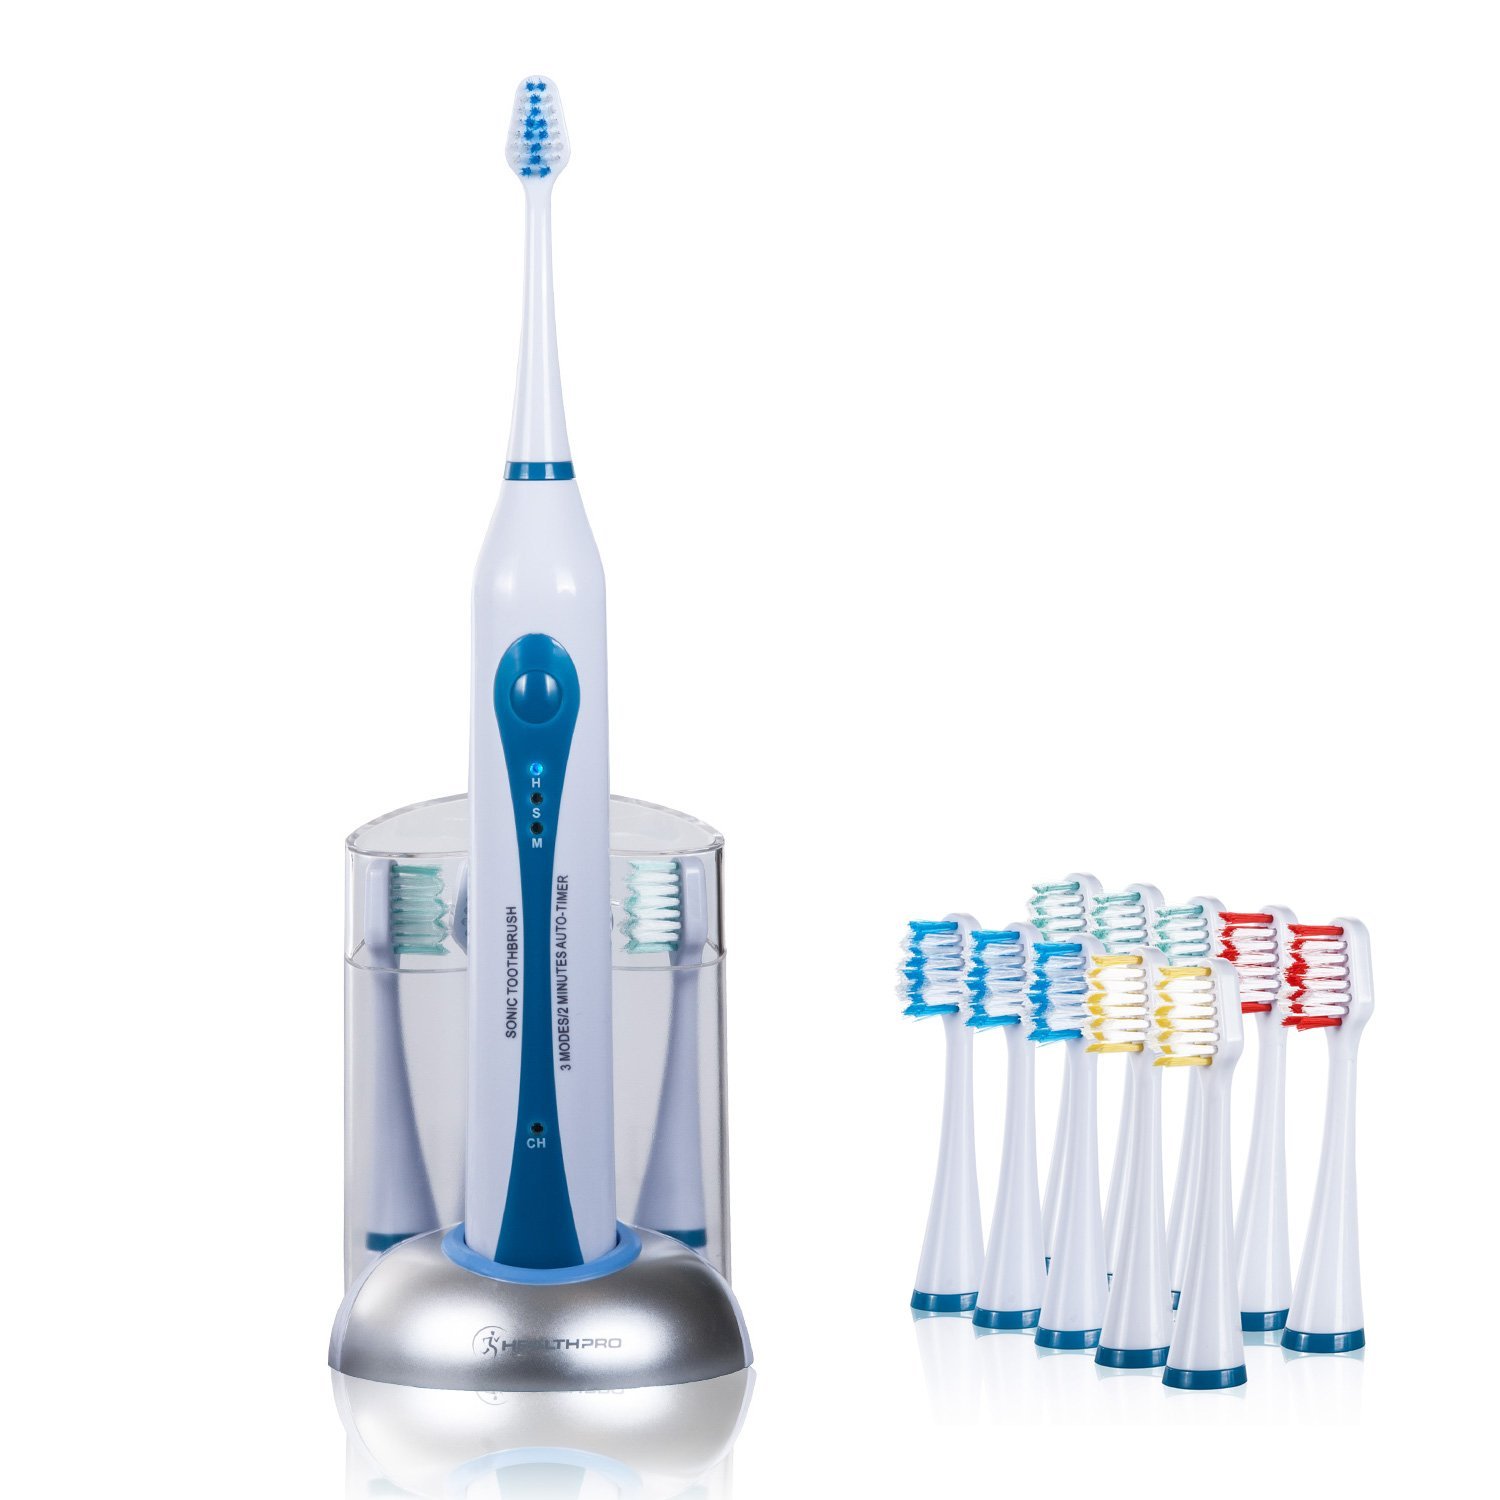 Health HP-STX High Power Sonic Electric Toothbrush with Dock Charger & 10 Heads—$22.95!